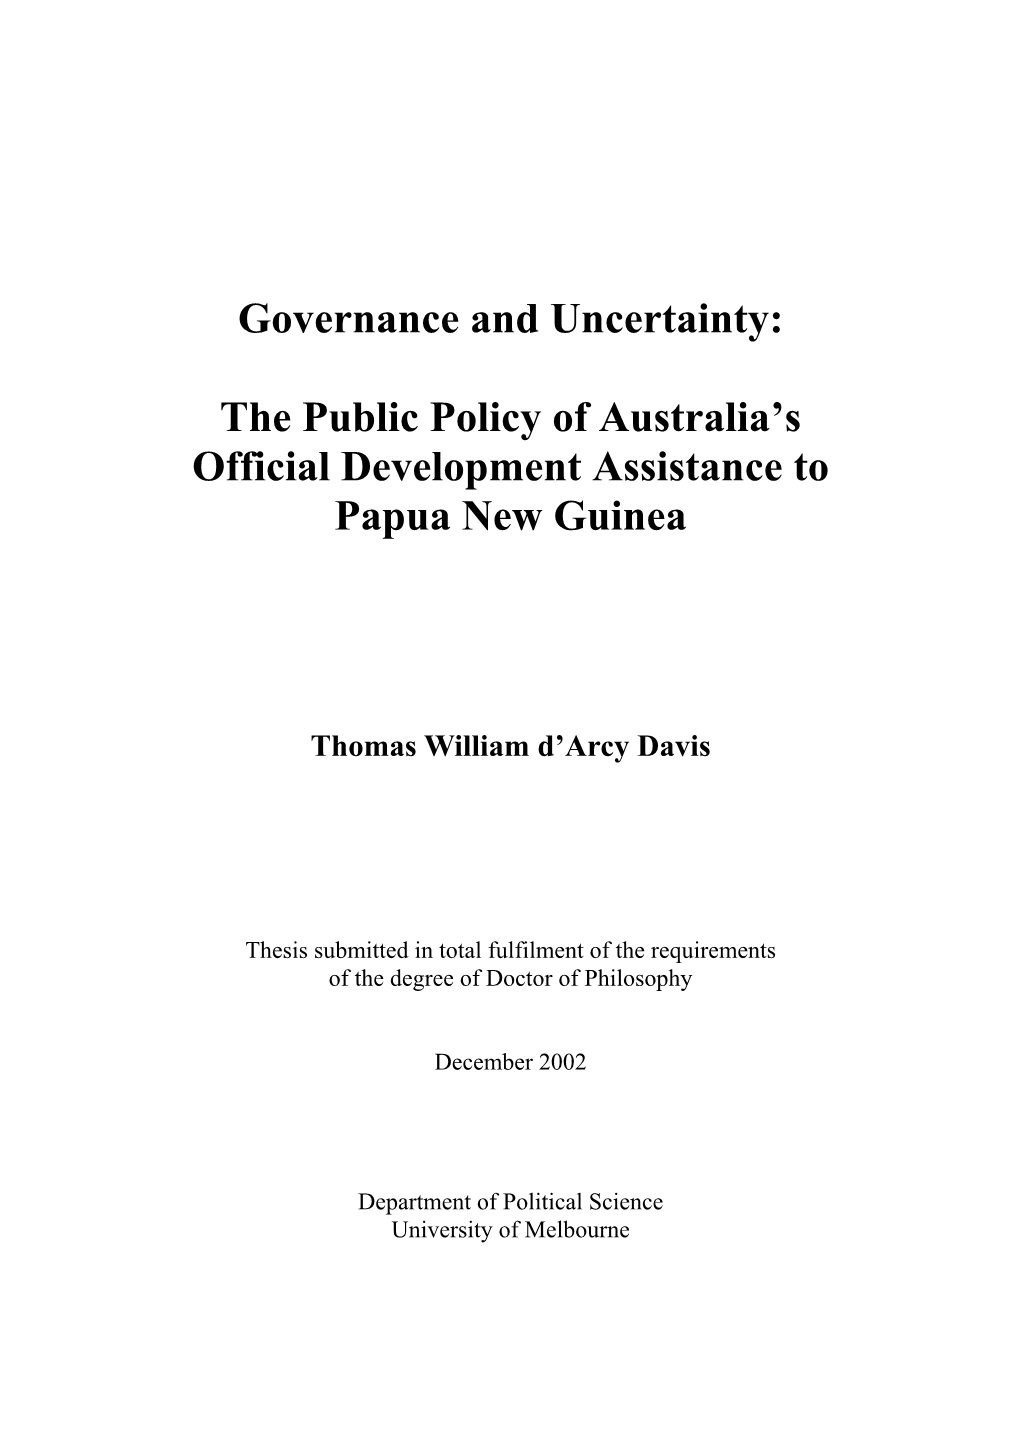 The Public Policy of Australia's Official Development Assistance to Papua New Guinea